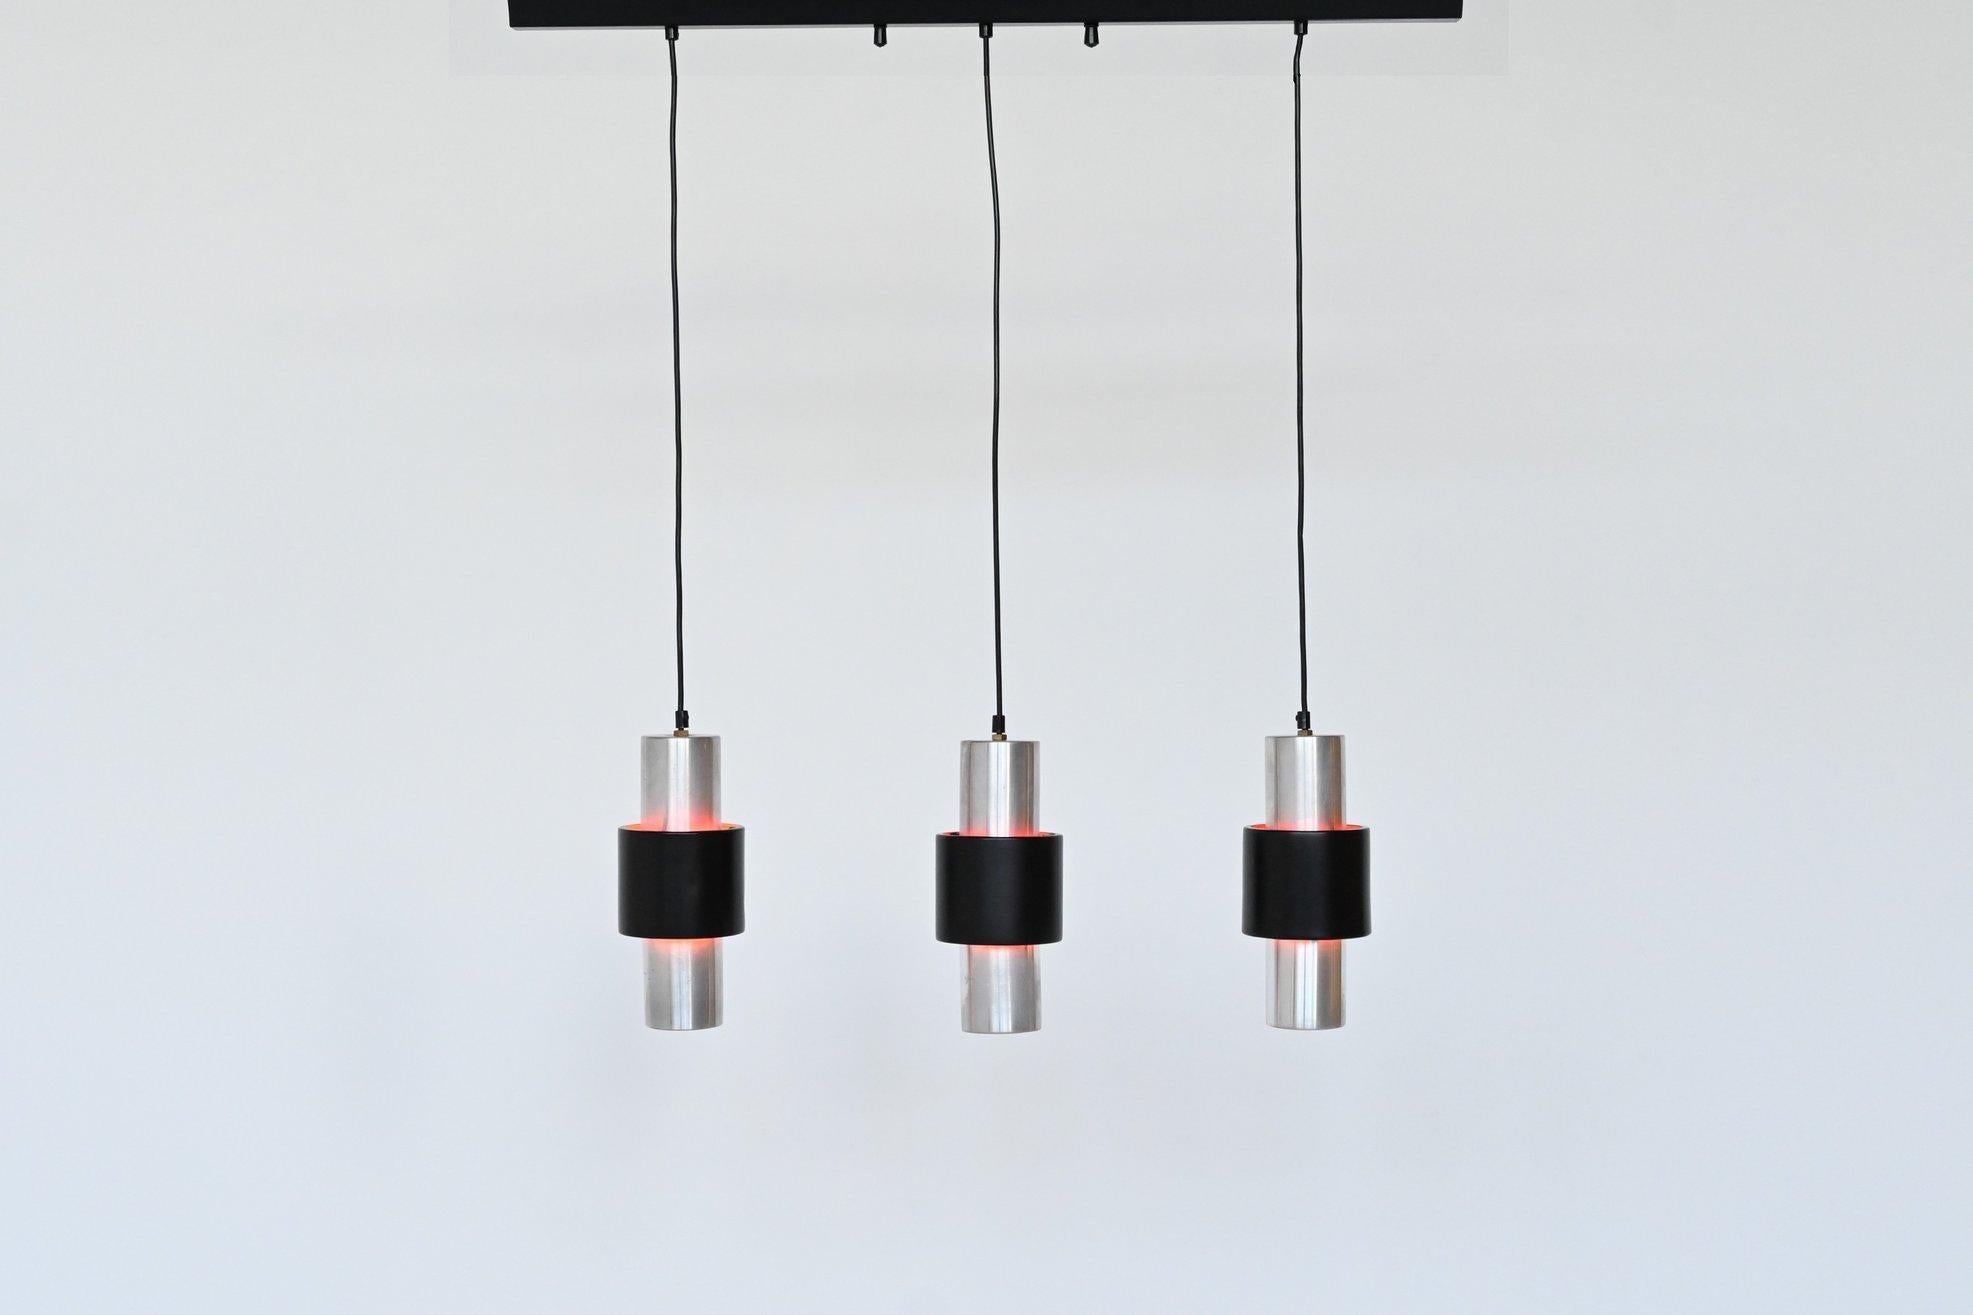 Beautiful set of three pendant lamps designed by Jo Hammerborg and manufactured by Fog and Morup, Denmark 1967. The lamps are made of aluminium with a black lacquered outer cylinder. The inside of the cylinder is lacquered in red so it emits a very